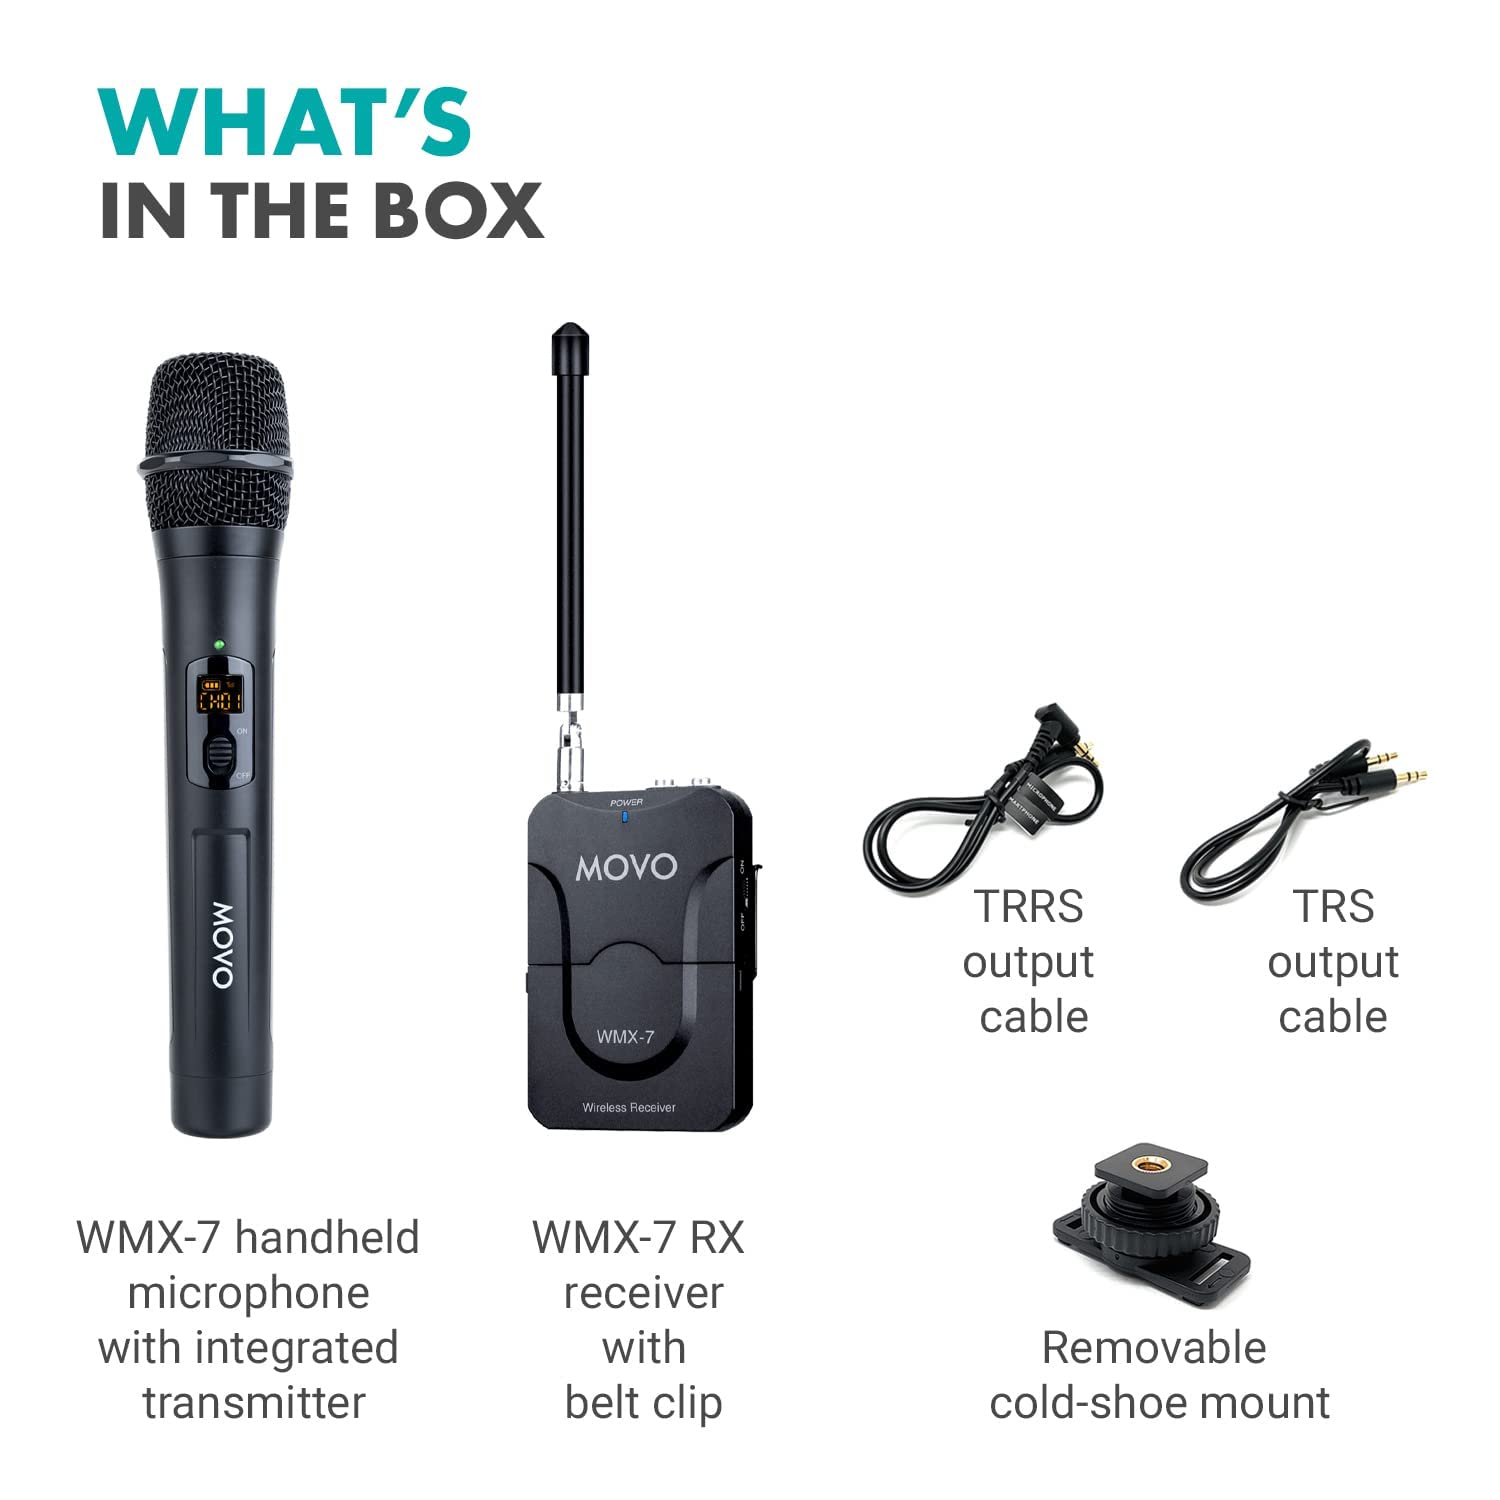 Movo WMX-7-TH+RX Handheld Wireless Microphone System - Omnidirectional Microphone with Built-in VHF Transmitter, Bodypack Receiver - Wireless Mic Interview Kit for Reporters, Vlogging, Live Events  - Like New